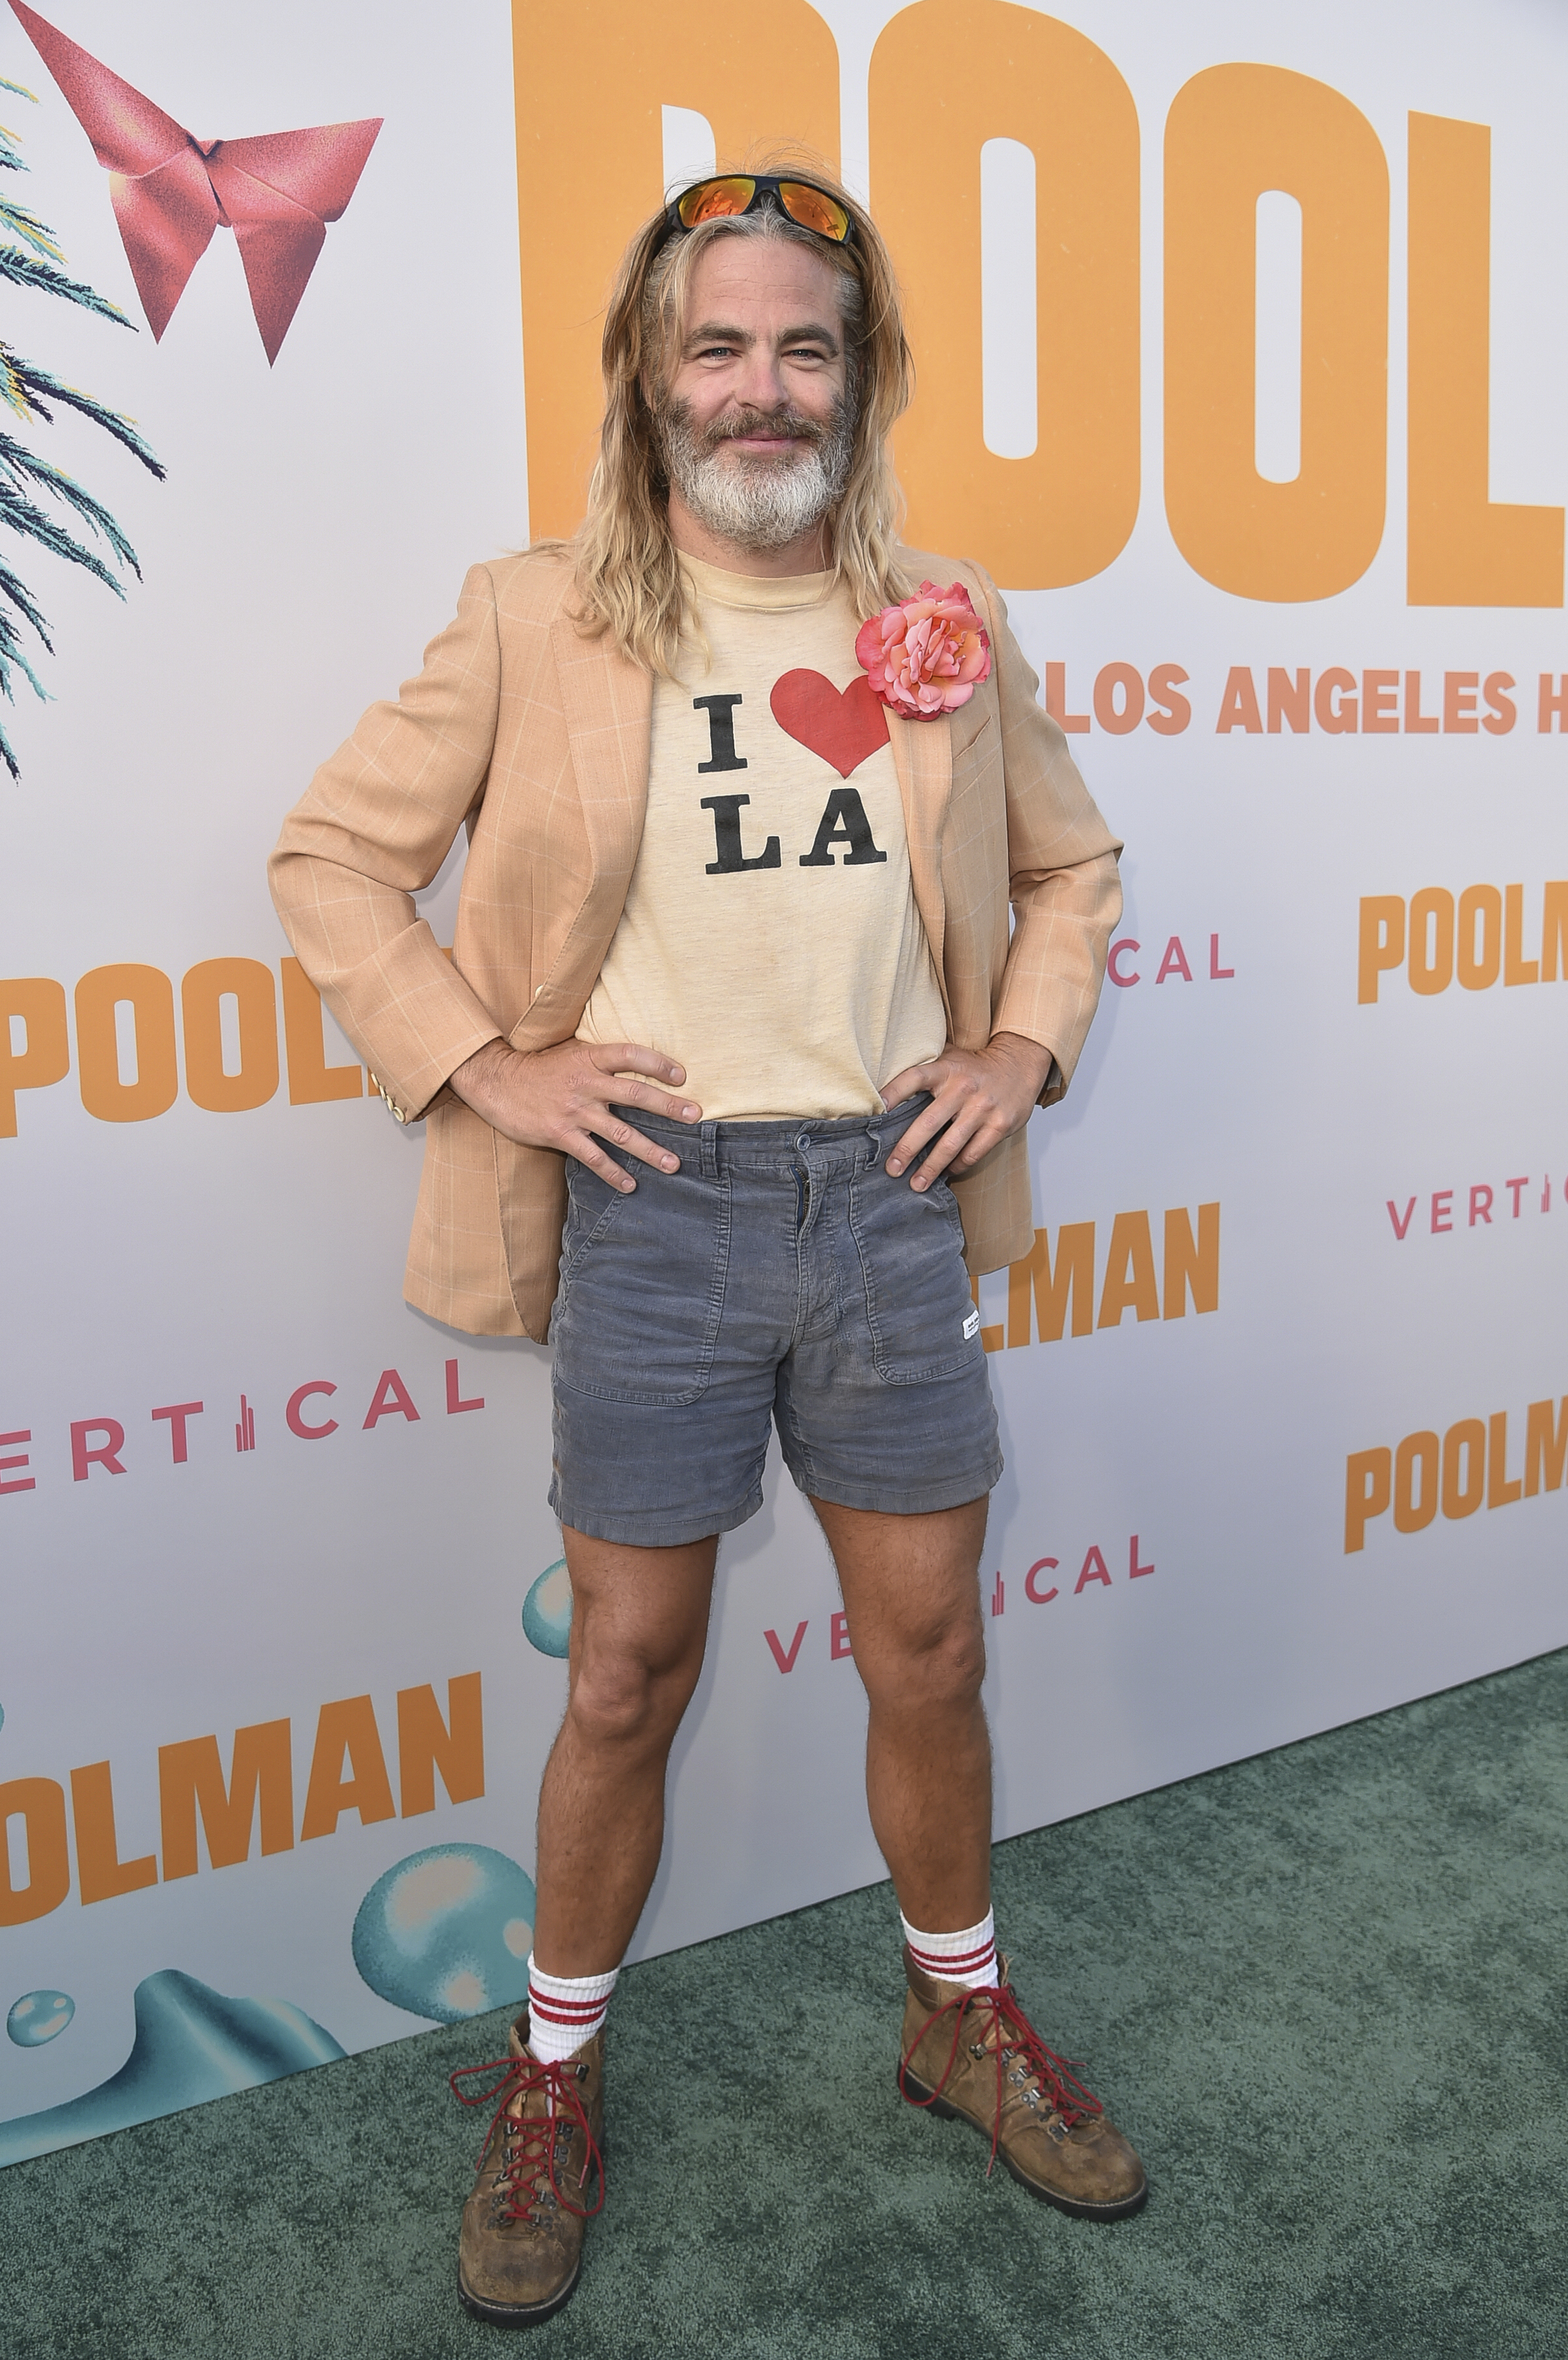 Chris Pine dressed up as the leading character from his new film Poolman during the Toronto International Film Festival